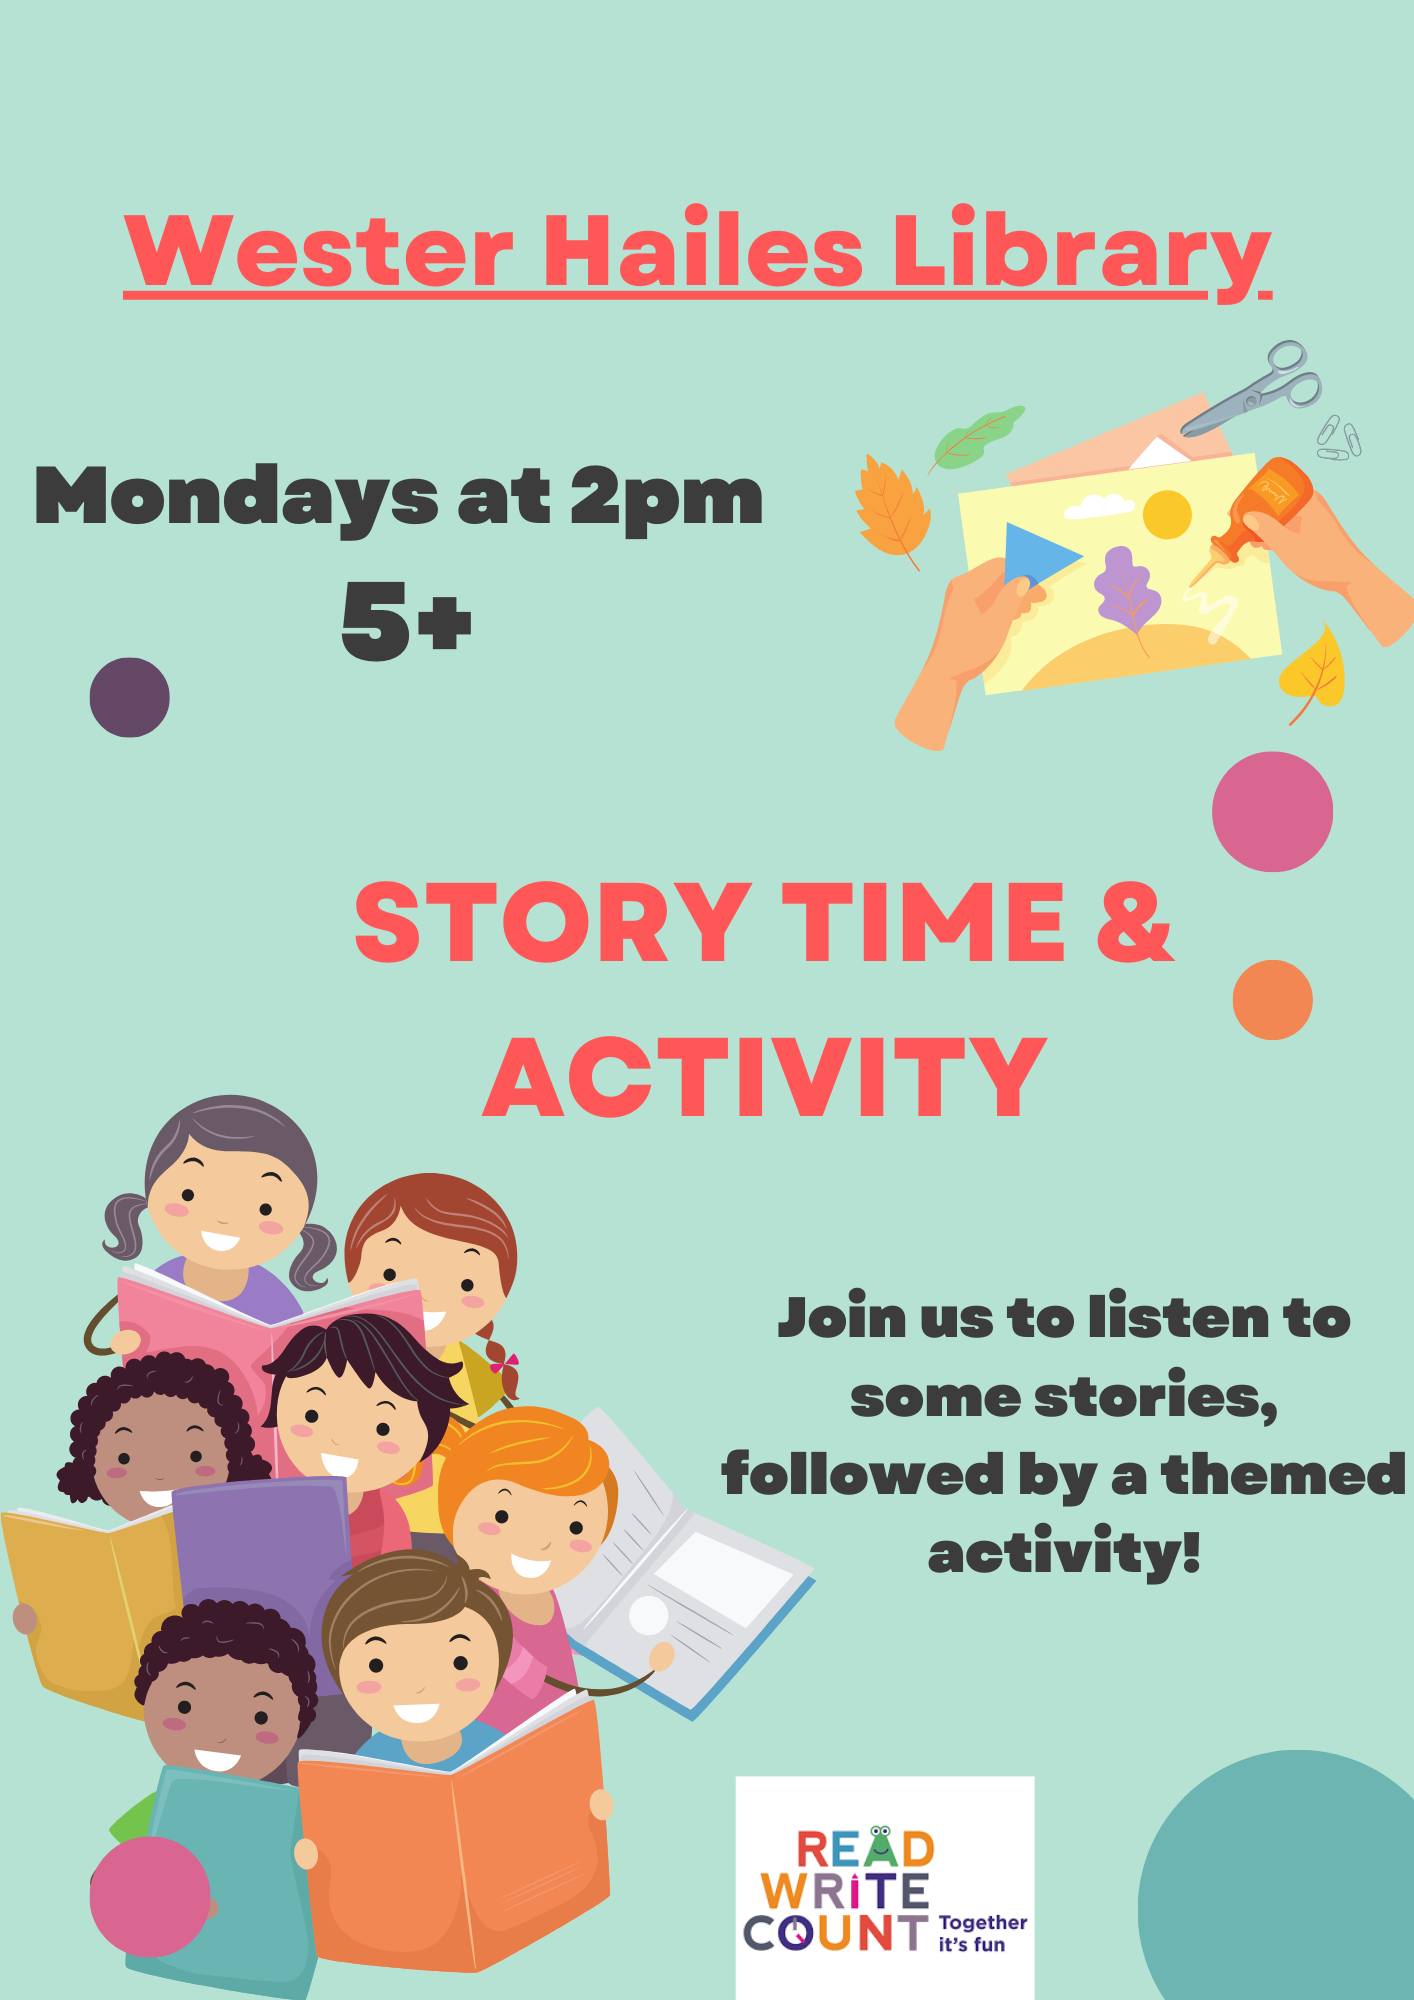 wester Hailes library story time and activity